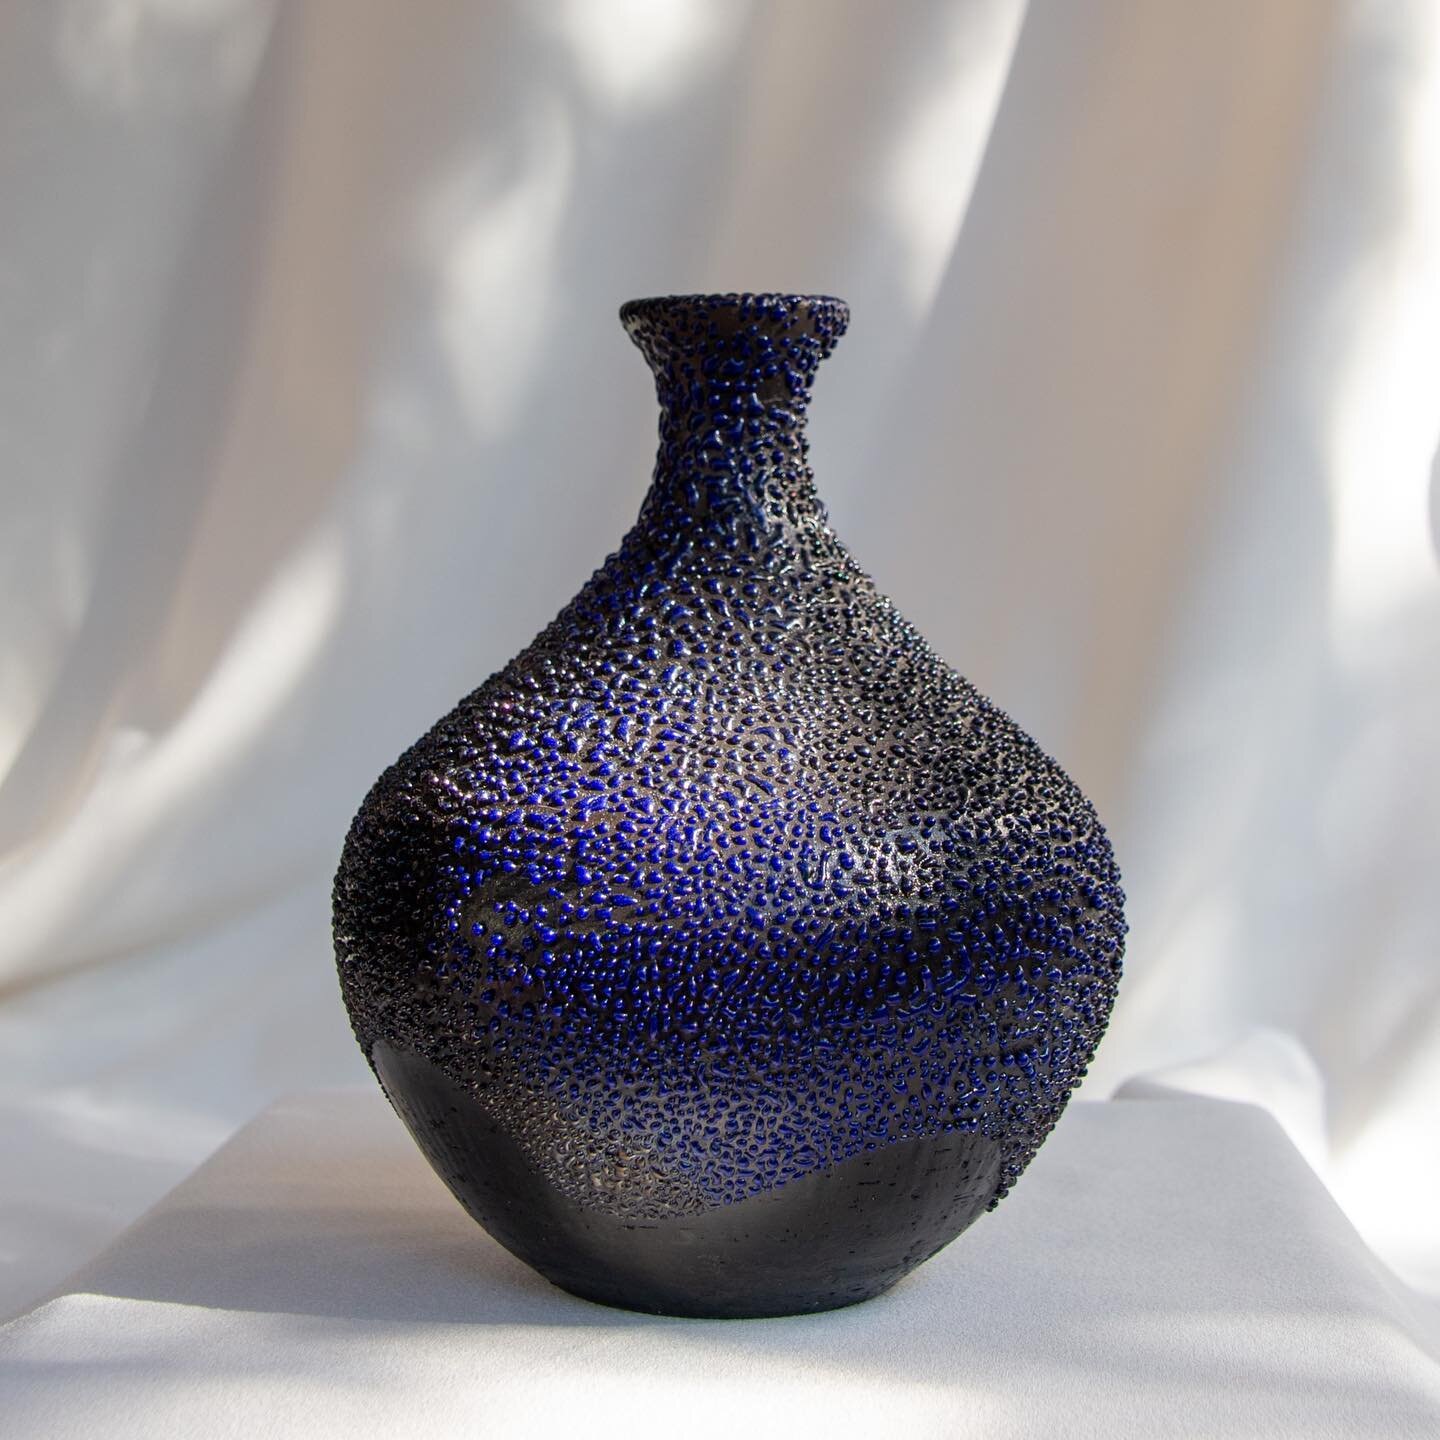 The crackle sapphire glaze is still my favourite most beautiful glaze I&rsquo;ve ever encountered. I love the look of the blue against the black and each individual little bubble of glaze. Who knew when I started ceramics I&rsquo;d fall in love with 